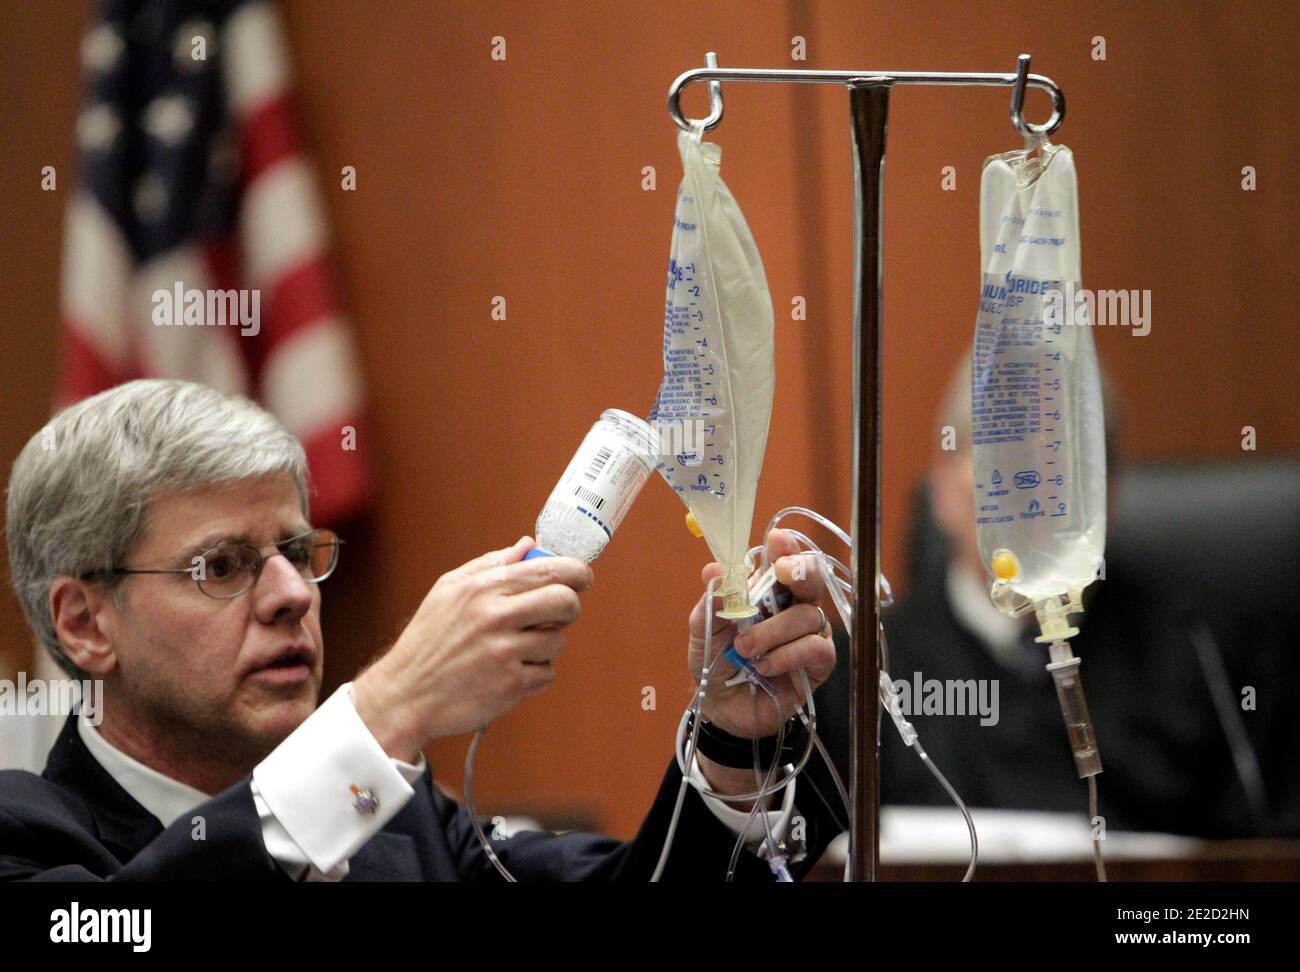 Anesthesiology expert Dr. Steven Shafer, left, places a bottle of propofol into an empty saline bag as he demonstrates the use of propofol during Dr. Conrad Murray's involuntary manslaughter trial in Los Angeles on October 20, 2011. Murray has pleaded not guilty and faces four years in prison and the loss of his medical license if convicted of involuntary manslaughter in Michael Jackson's death. Photo by Reed Saxon/Pool/ABACAPRESS.COM Stock Photo